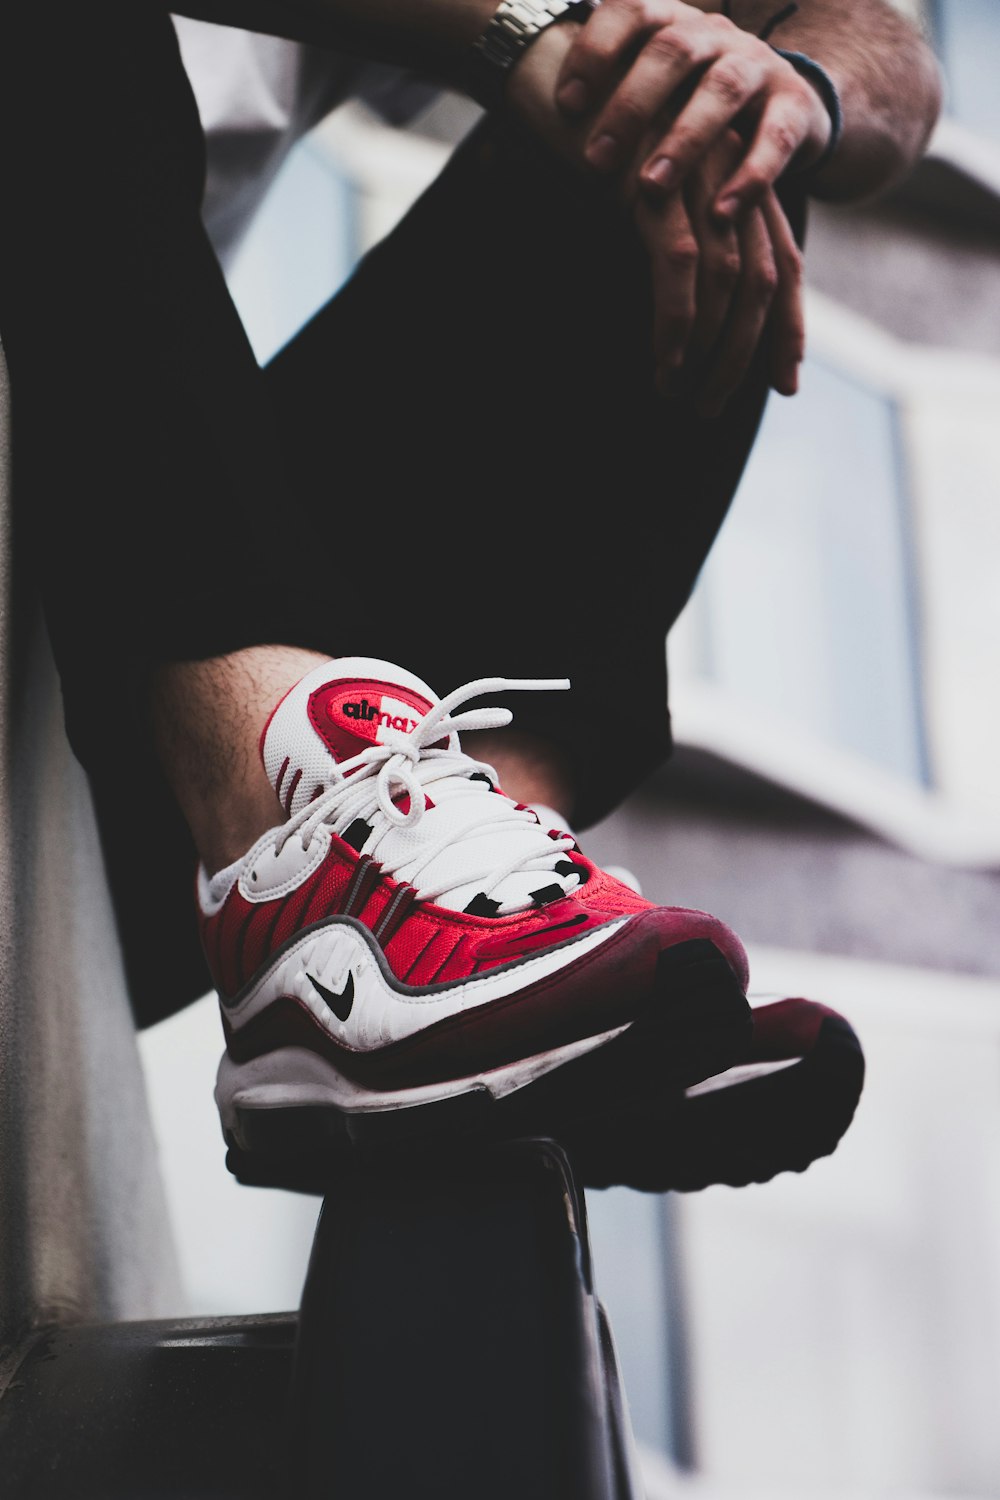 Red-and-white Nike Air Max shoes\ photo – Free Paris Image on Unsplash